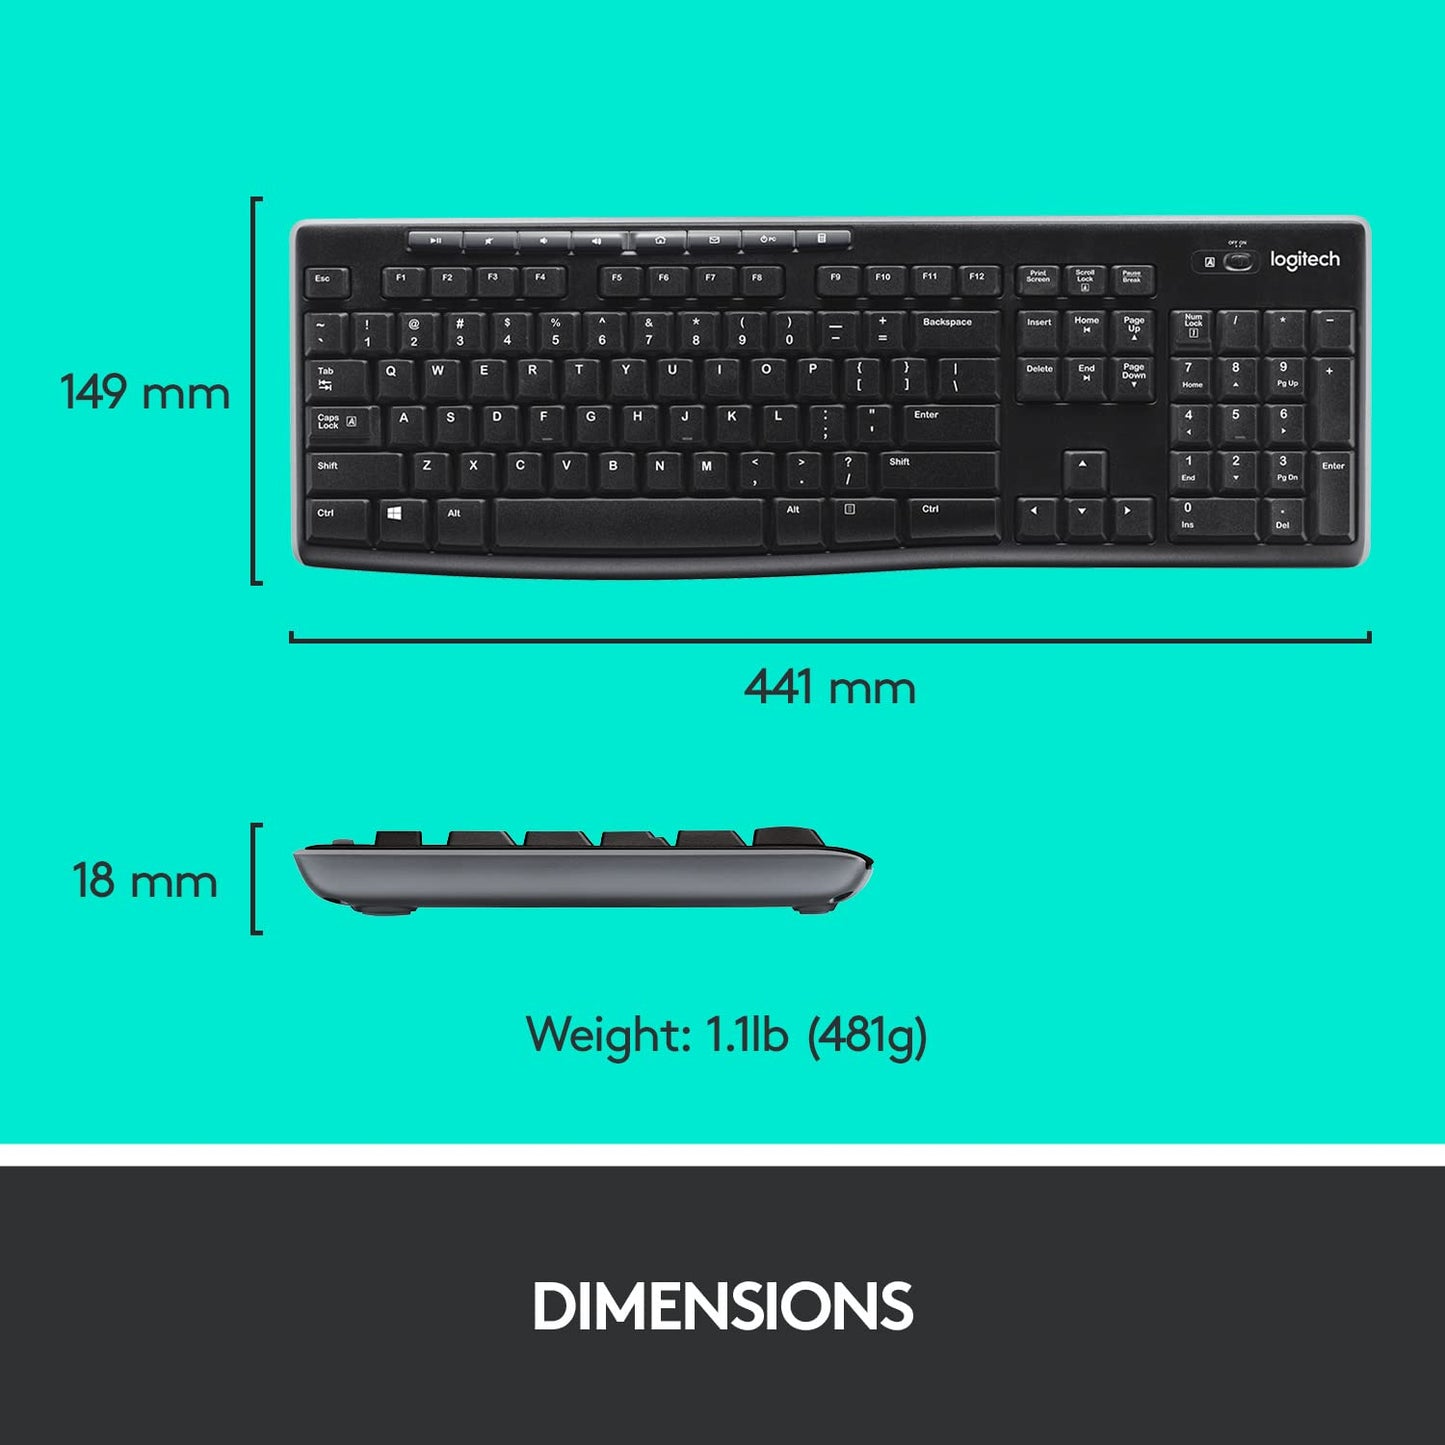 Logitech Mk270 Wireless Keyboard And Mouse Combo For Windows, 2.4 Ghz Wireless, Compact Wireless Mouse, 8 Multimedia And Shortcut Keys, 2-Year Battery Life, Pc/Laptop, English/Arabic